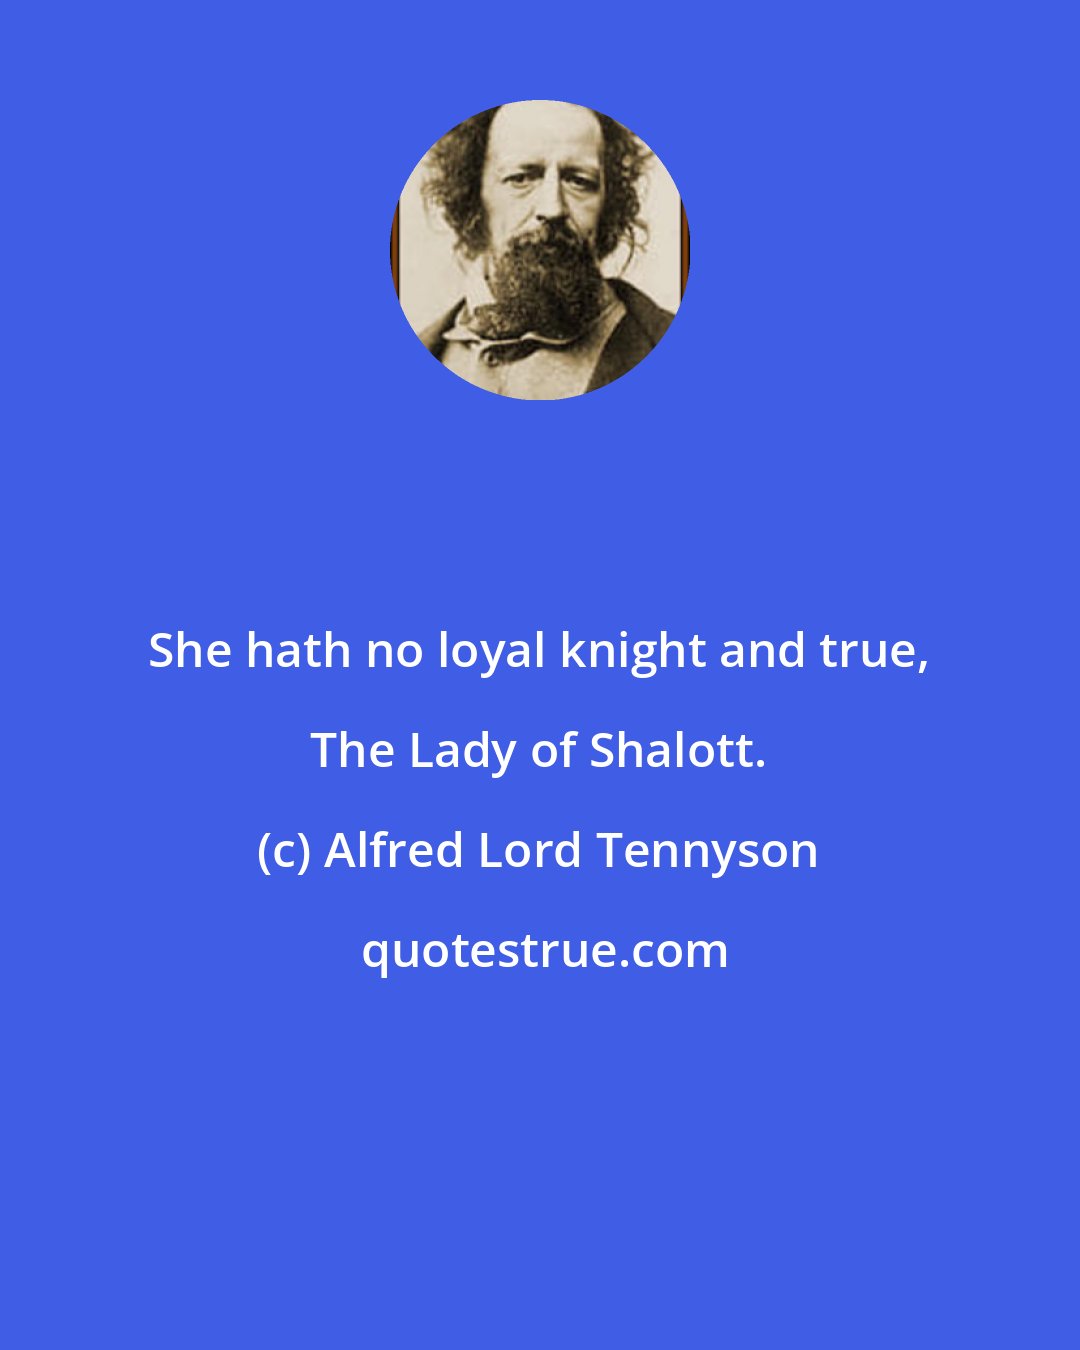 Alfred Lord Tennyson: She hath no loyal knight and true, The Lady of Shalott.